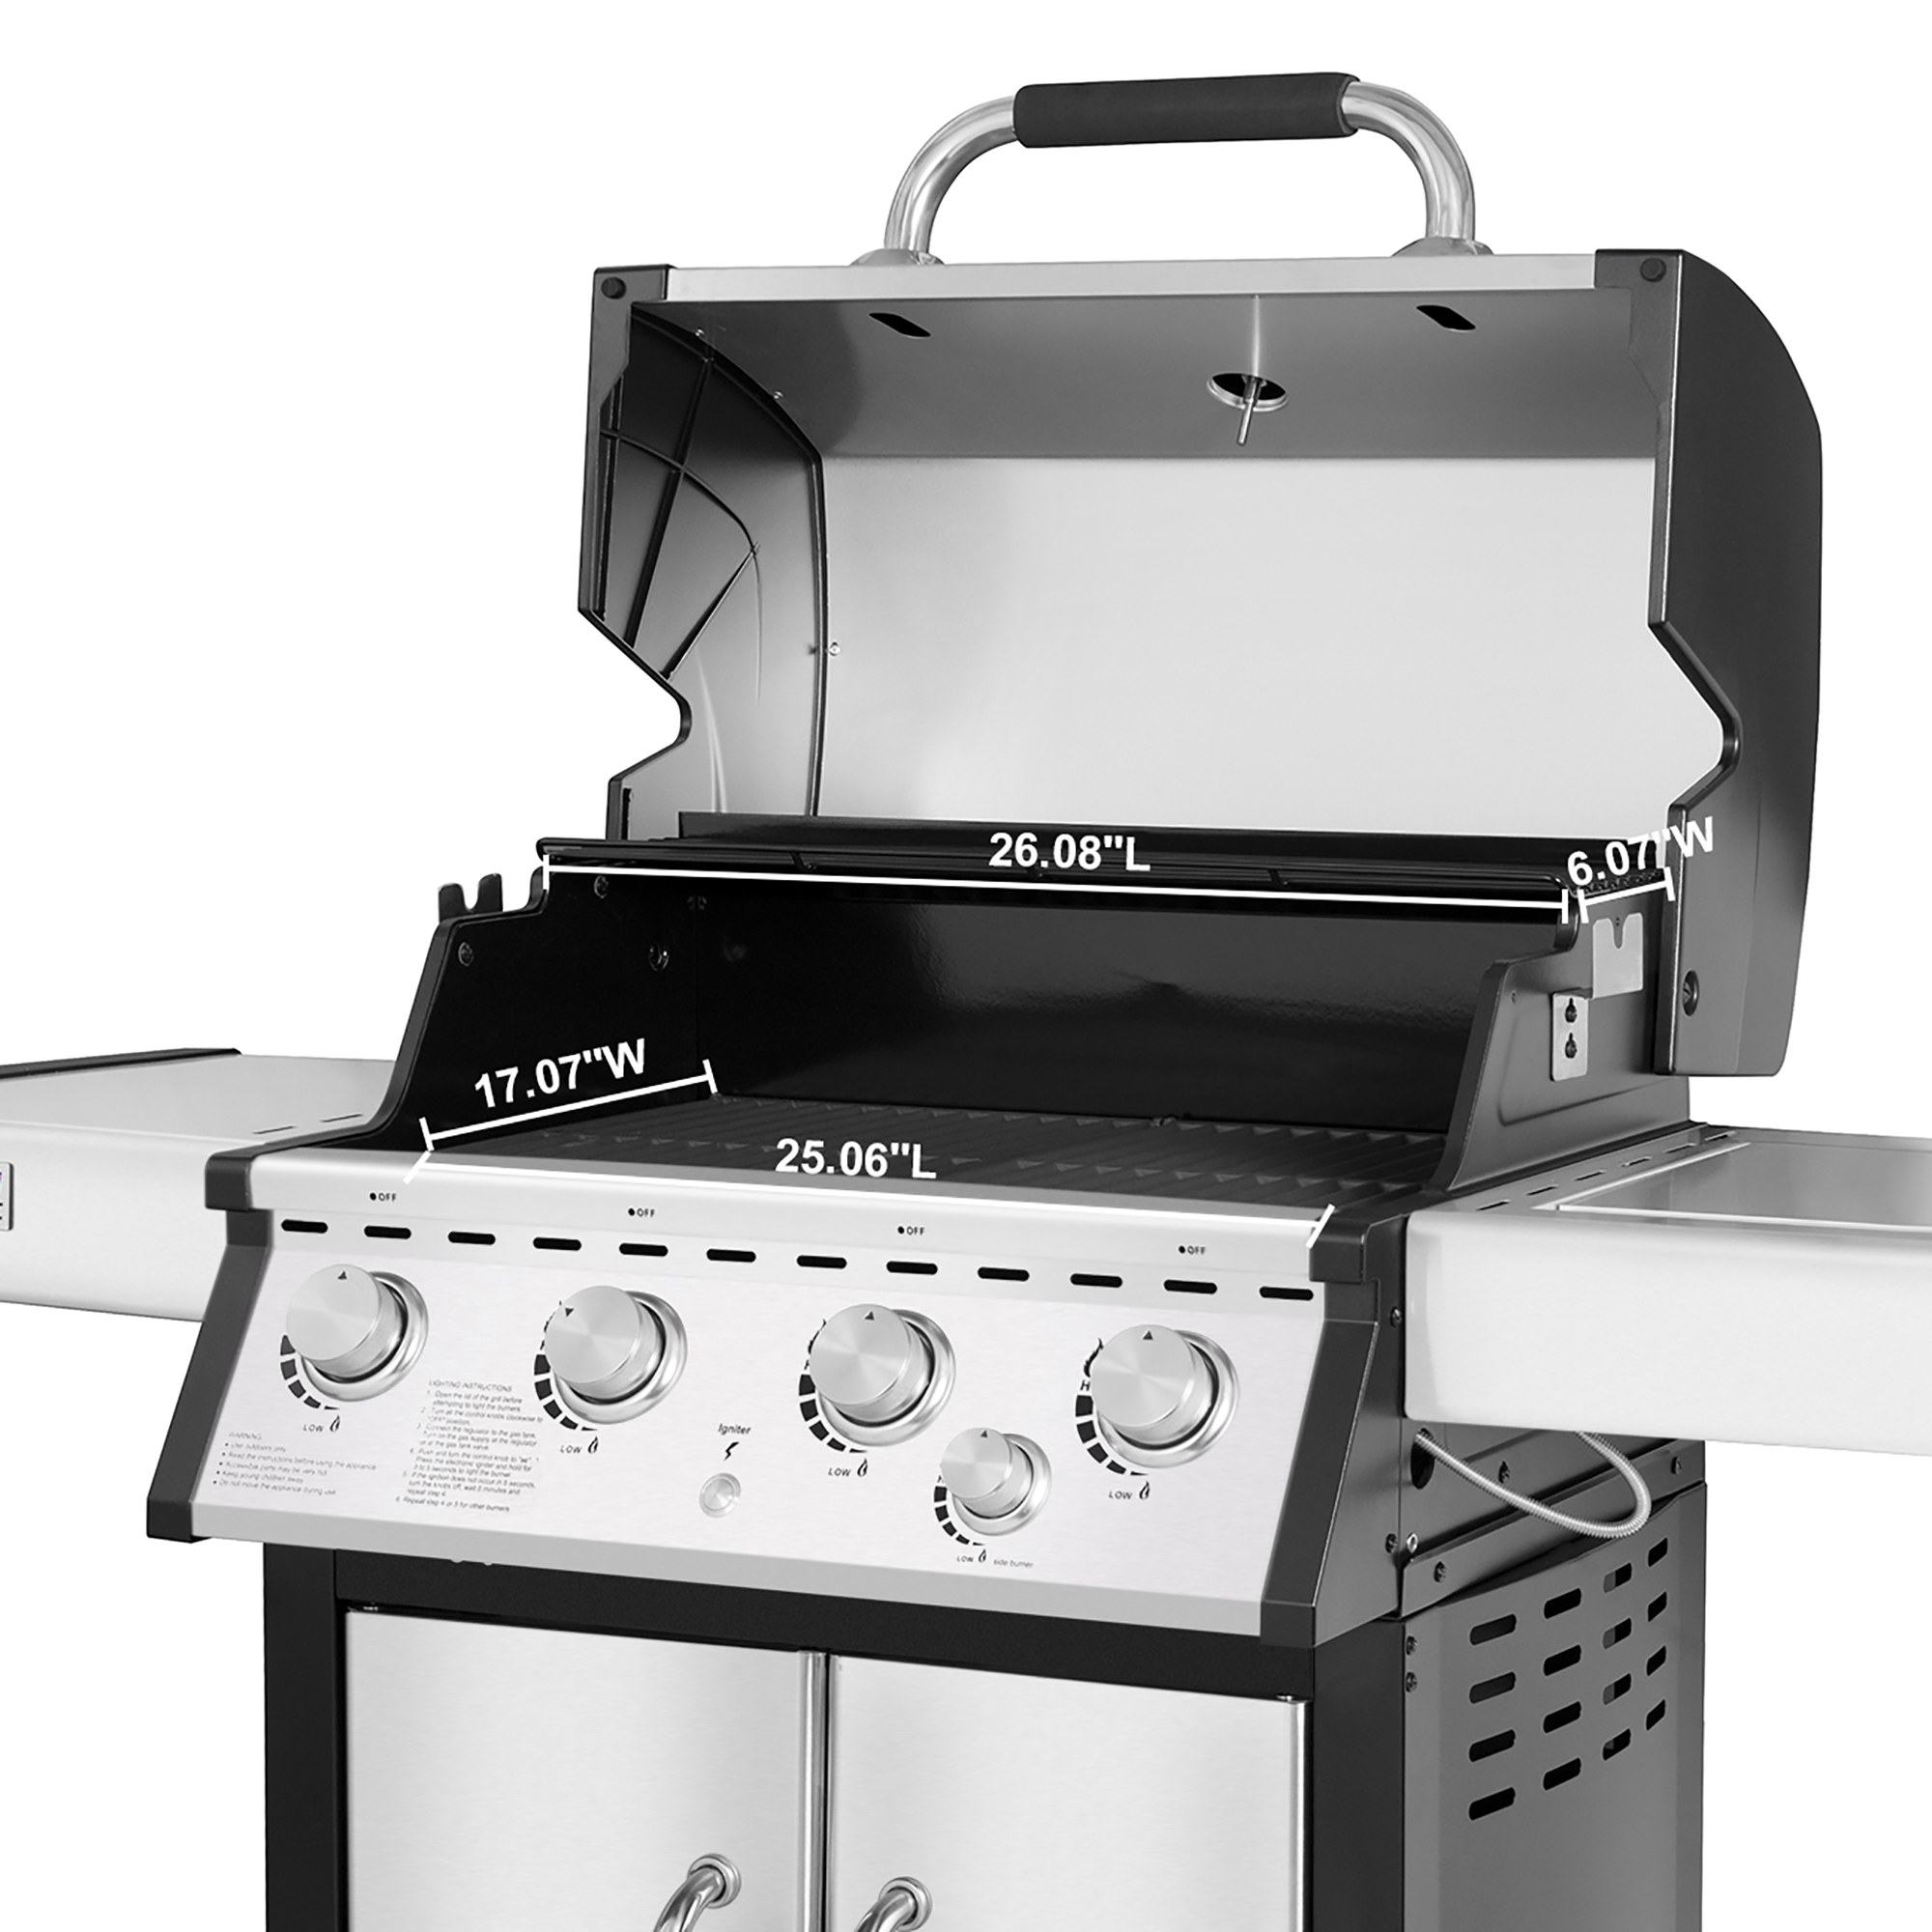 Royal Gourmet MG4001 4-Burner Propane Gas Grill with Side Burner, Stainless Steel, 60000 BTU - image 4 of 7